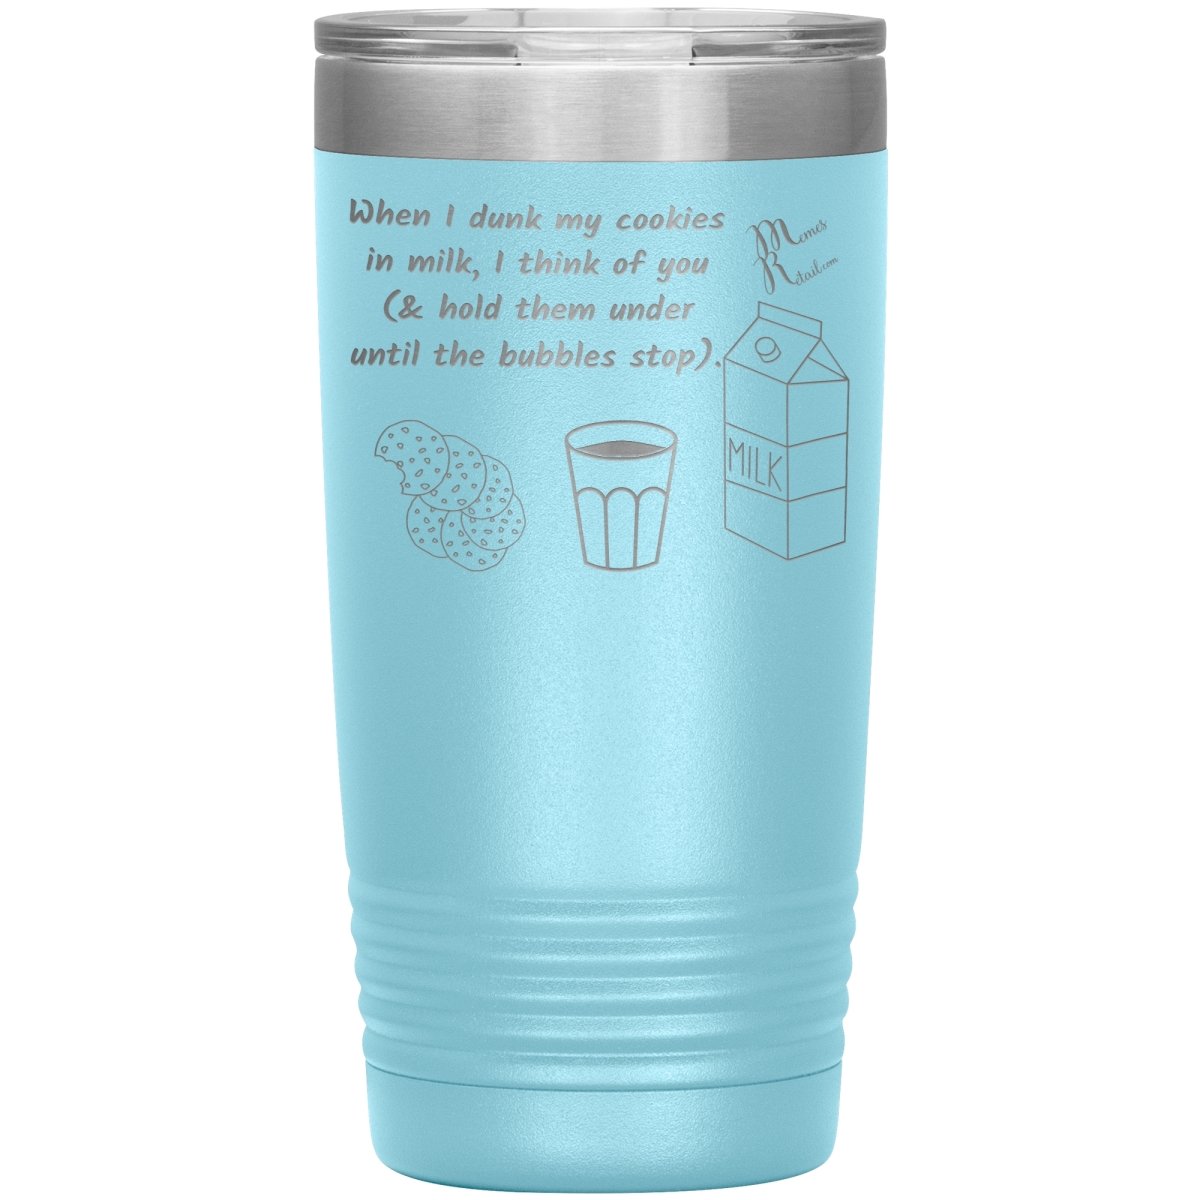 When I dunk My Cookies in Milk, I think of You - Tumblers, 20oz Insulated Tumbler / Light Blue - MemesRetail.com